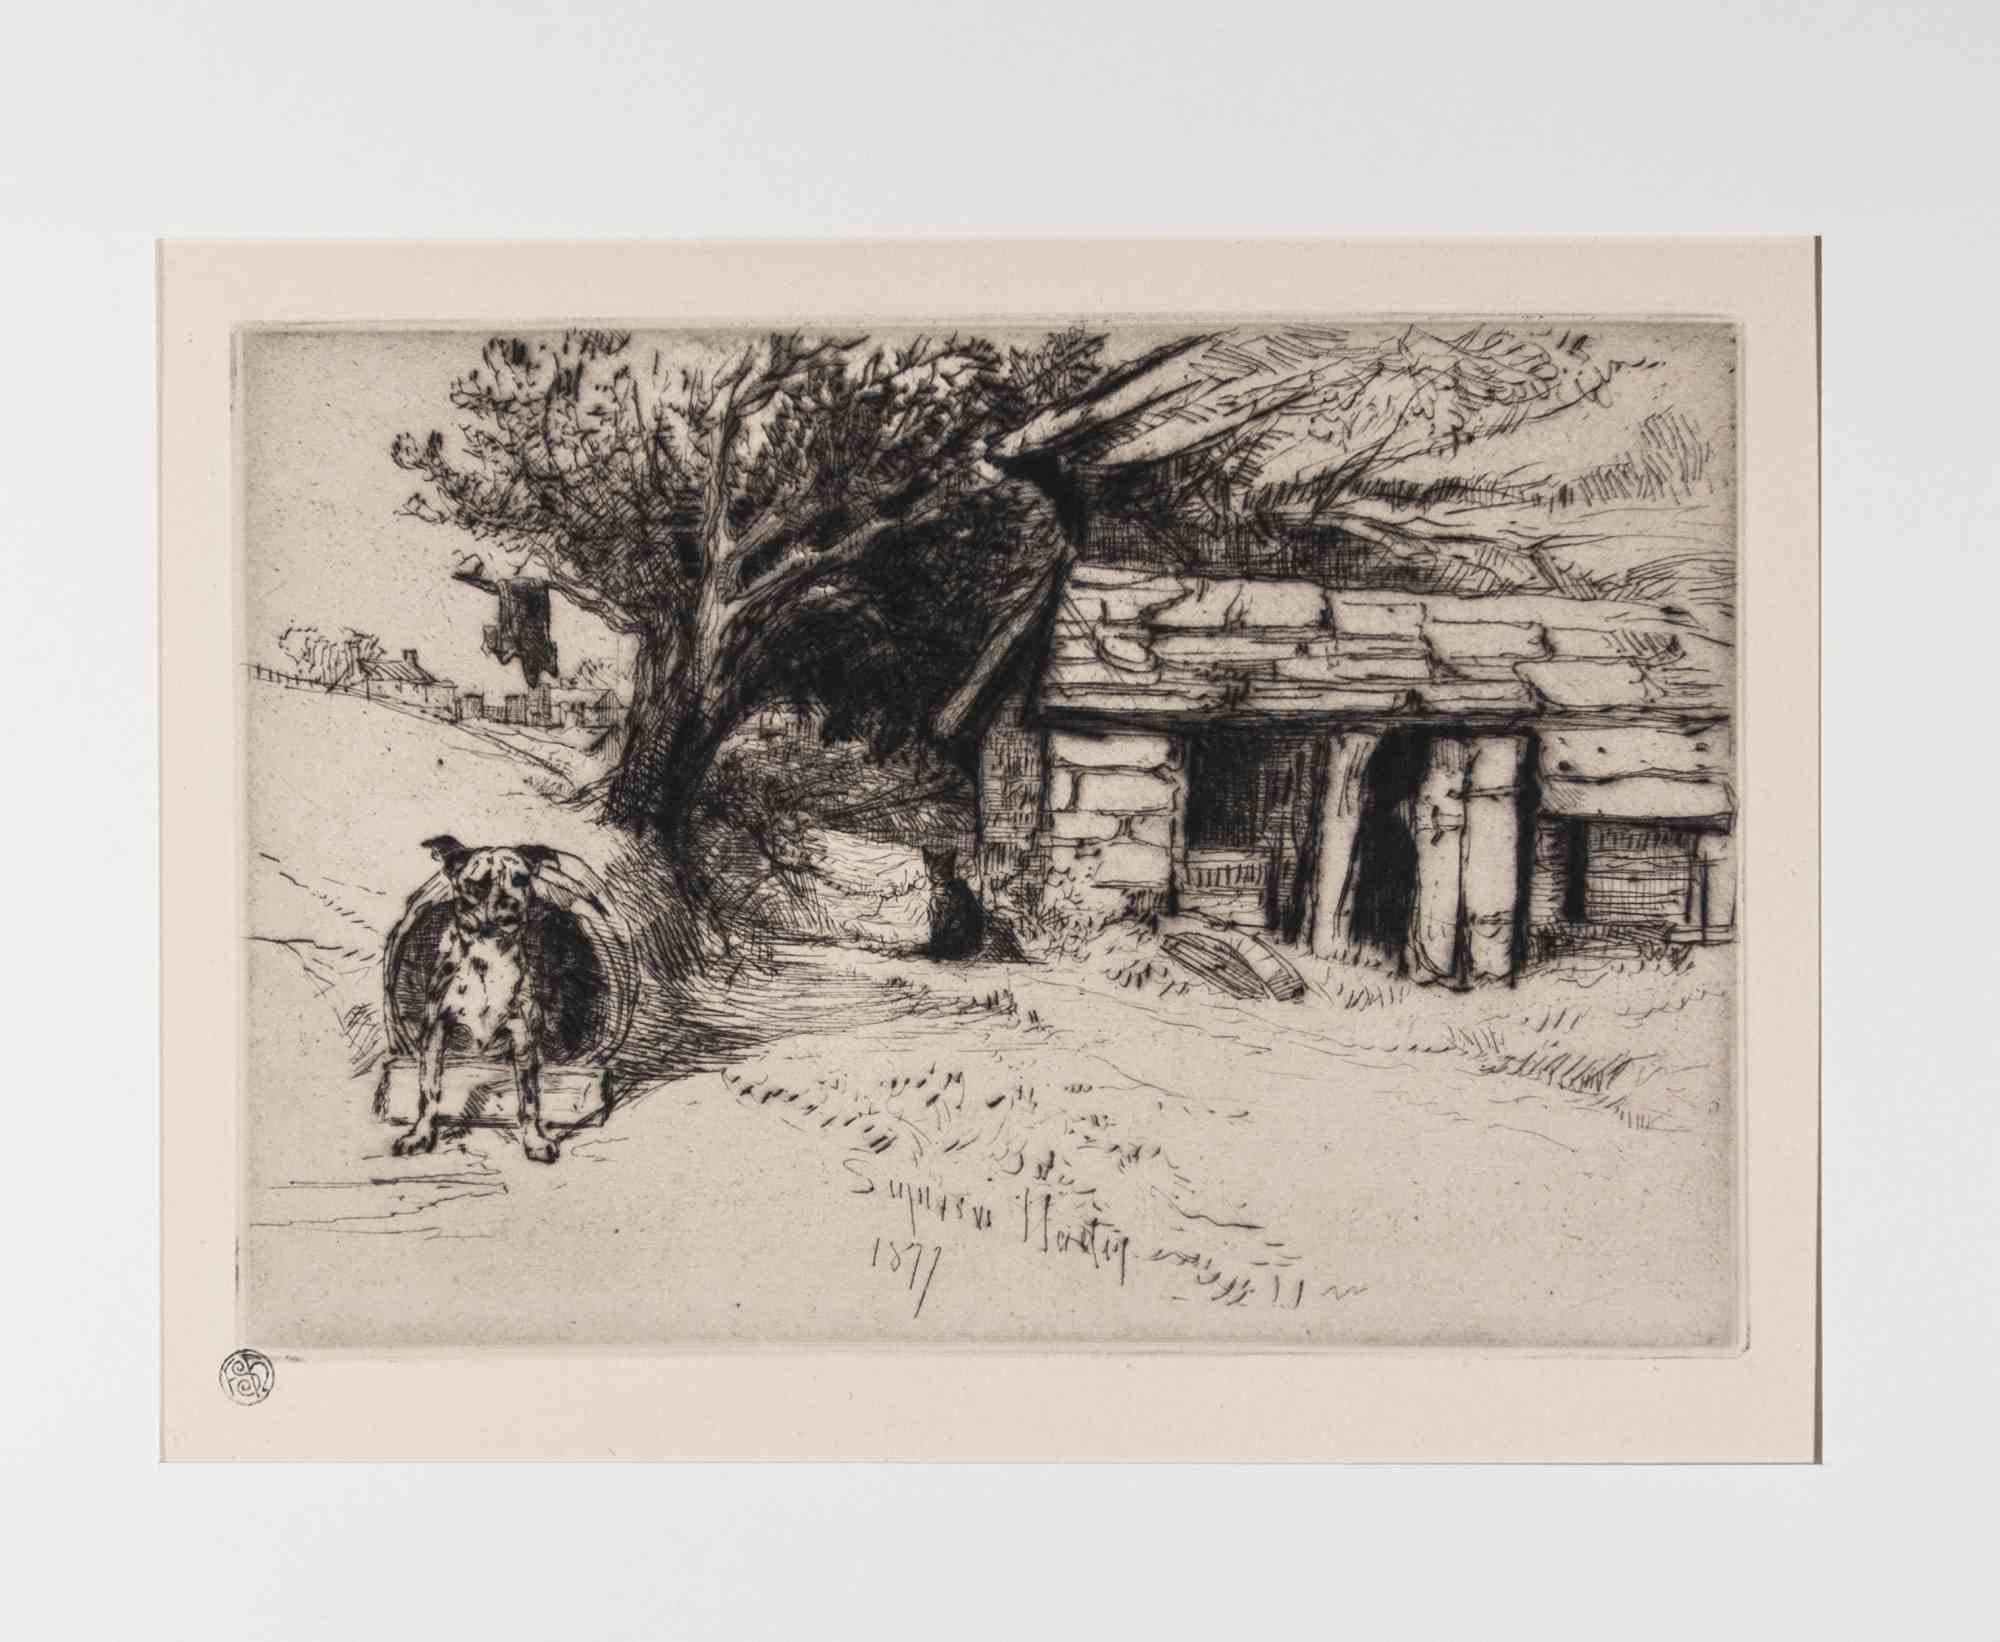 The Cabin is an original Modern artwork realized by Sir Francis Saymour-Haden (16 September 1818 – 1 June 1910) in 1877.

Beautiful Proof on vélin fort, with stamp "Lugt 1048”. Full margins.

Drypoint on paper.

Signed and dated on plate on the